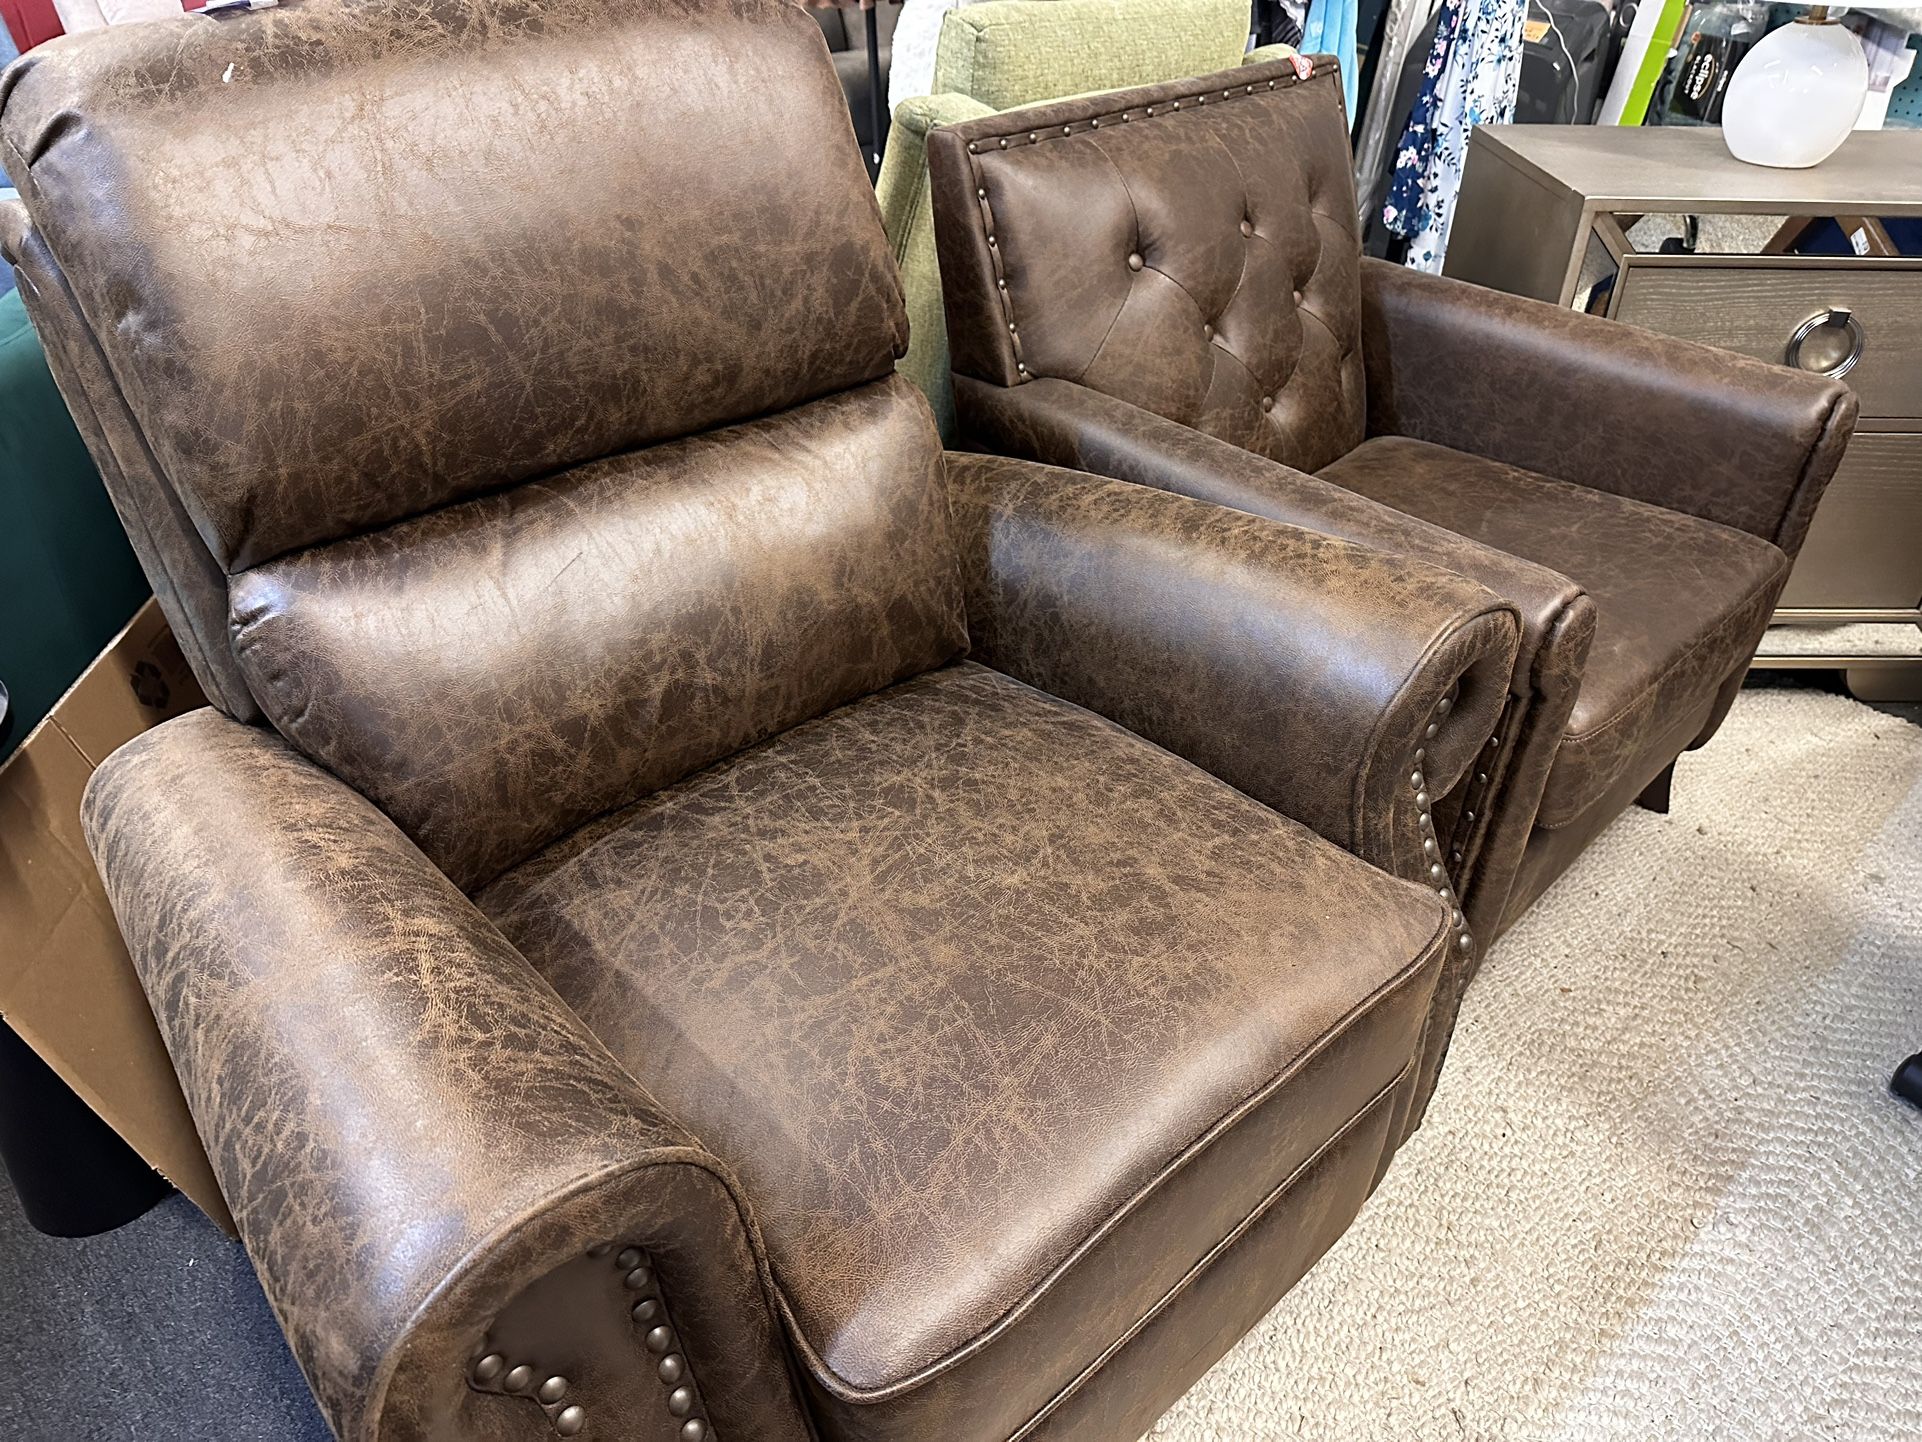 Recliners $269-$369